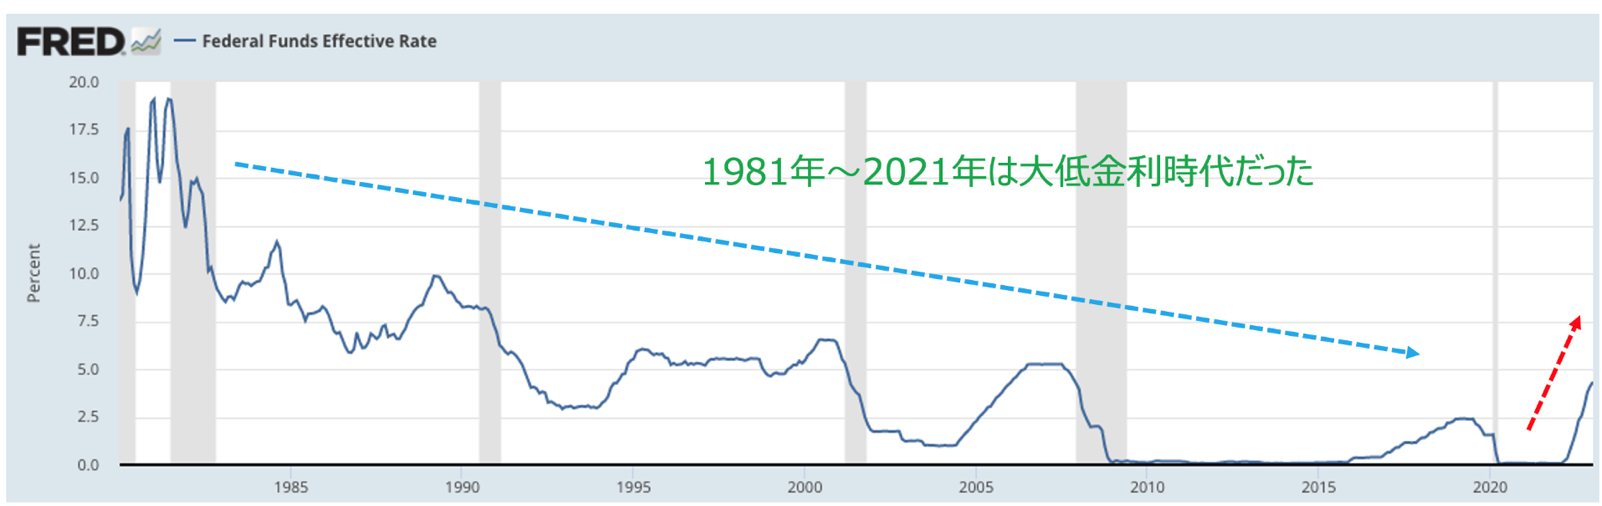 Federal Funds Effective Rate (FEDFUNDS)